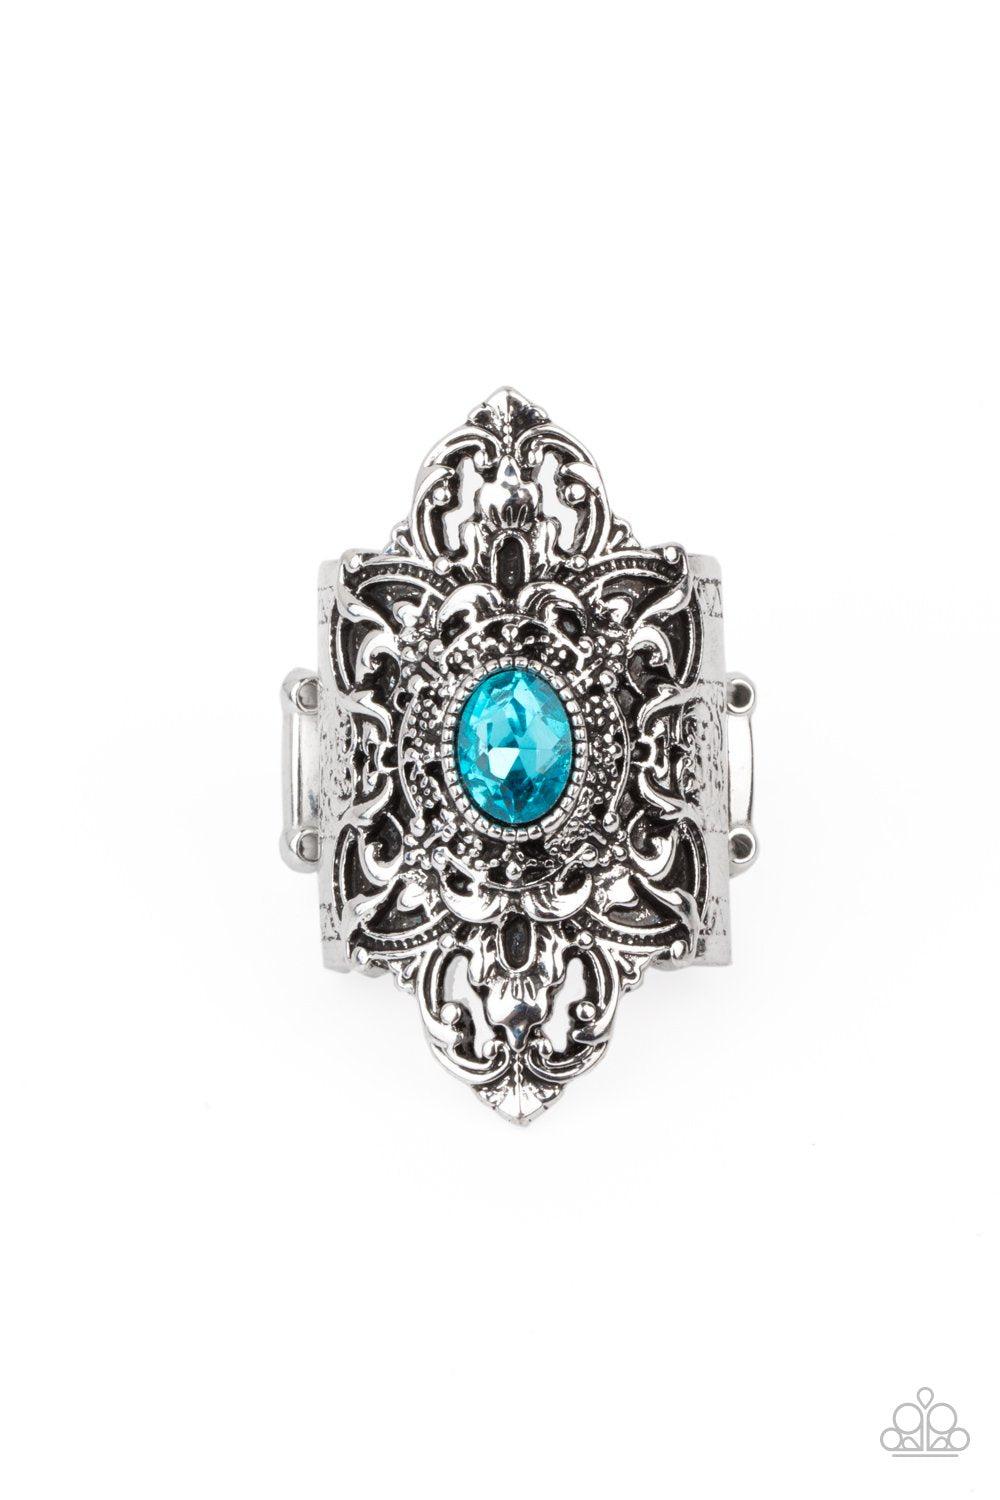 Perennial Posh Blue Rhinestone and Floral Ring - Paparazzi Accessories- lightbox - CarasShop.com - $5 Jewelry by Cara Jewels